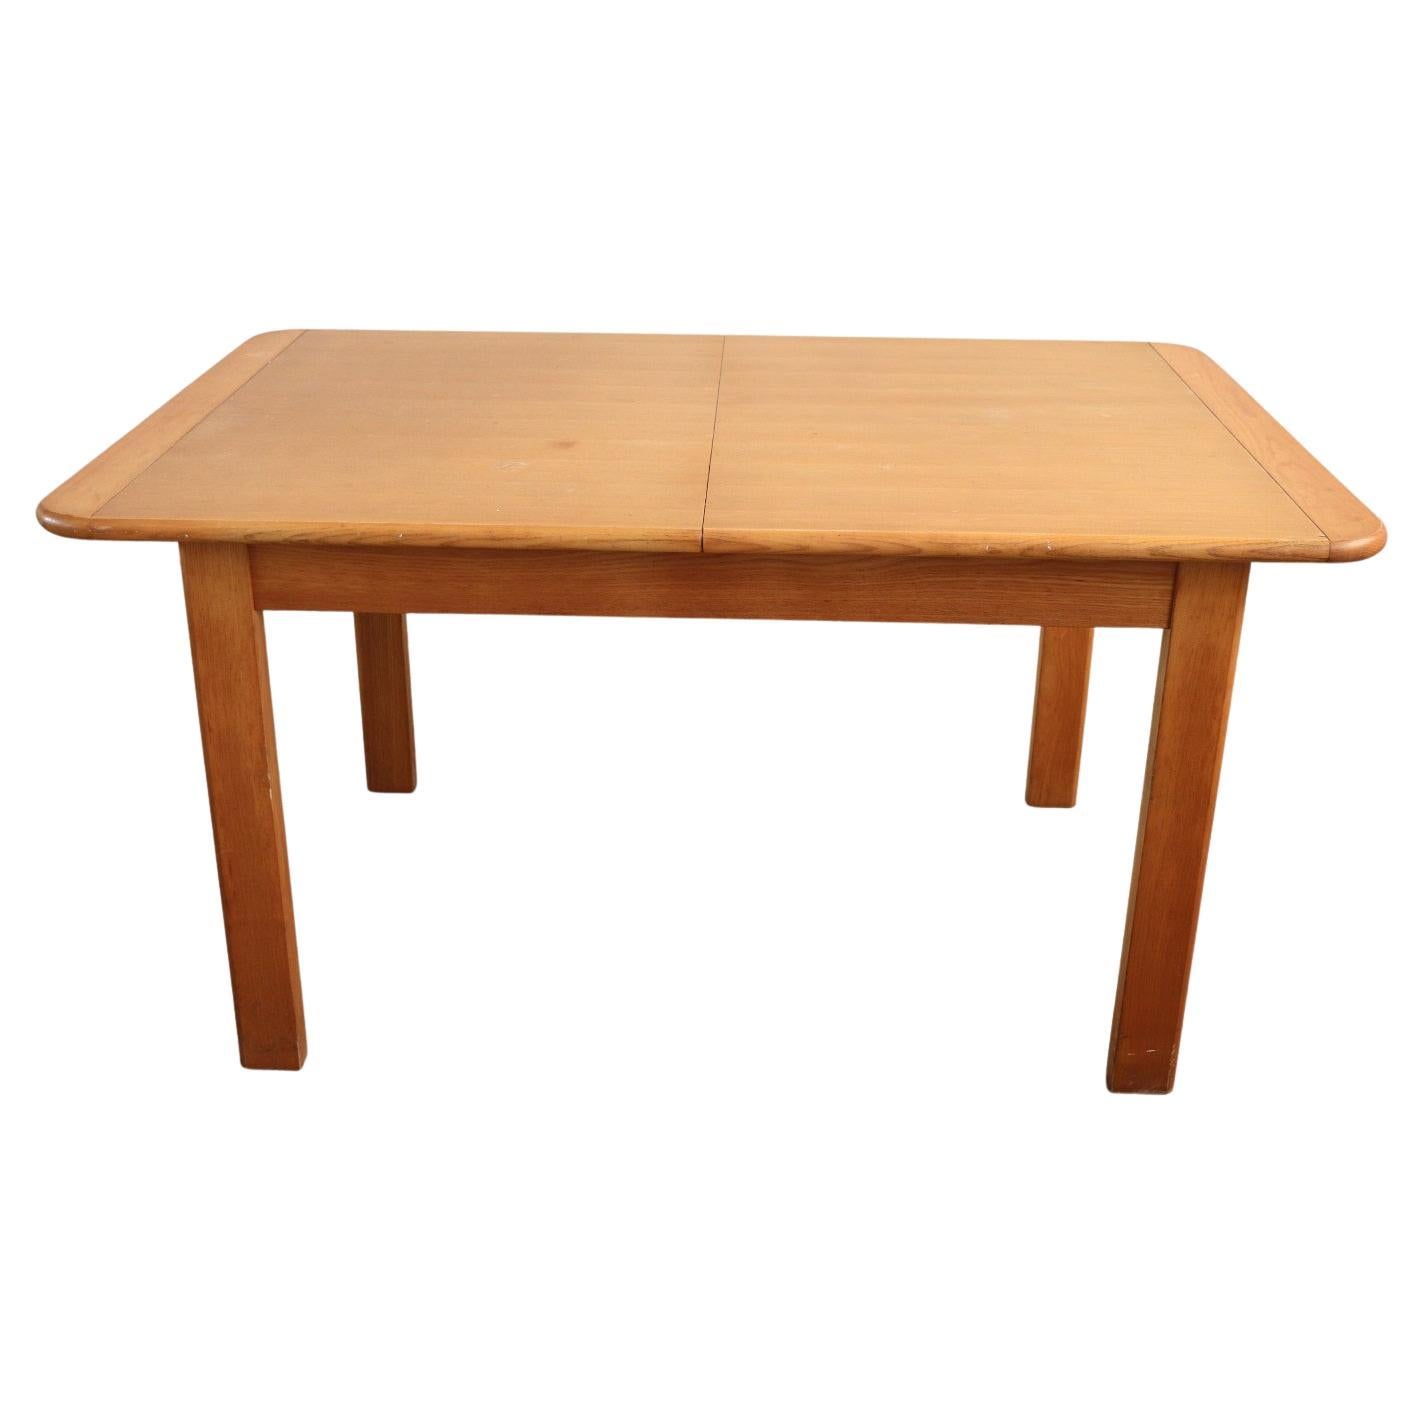 Swedish Design Extendable Dining Table For Sale